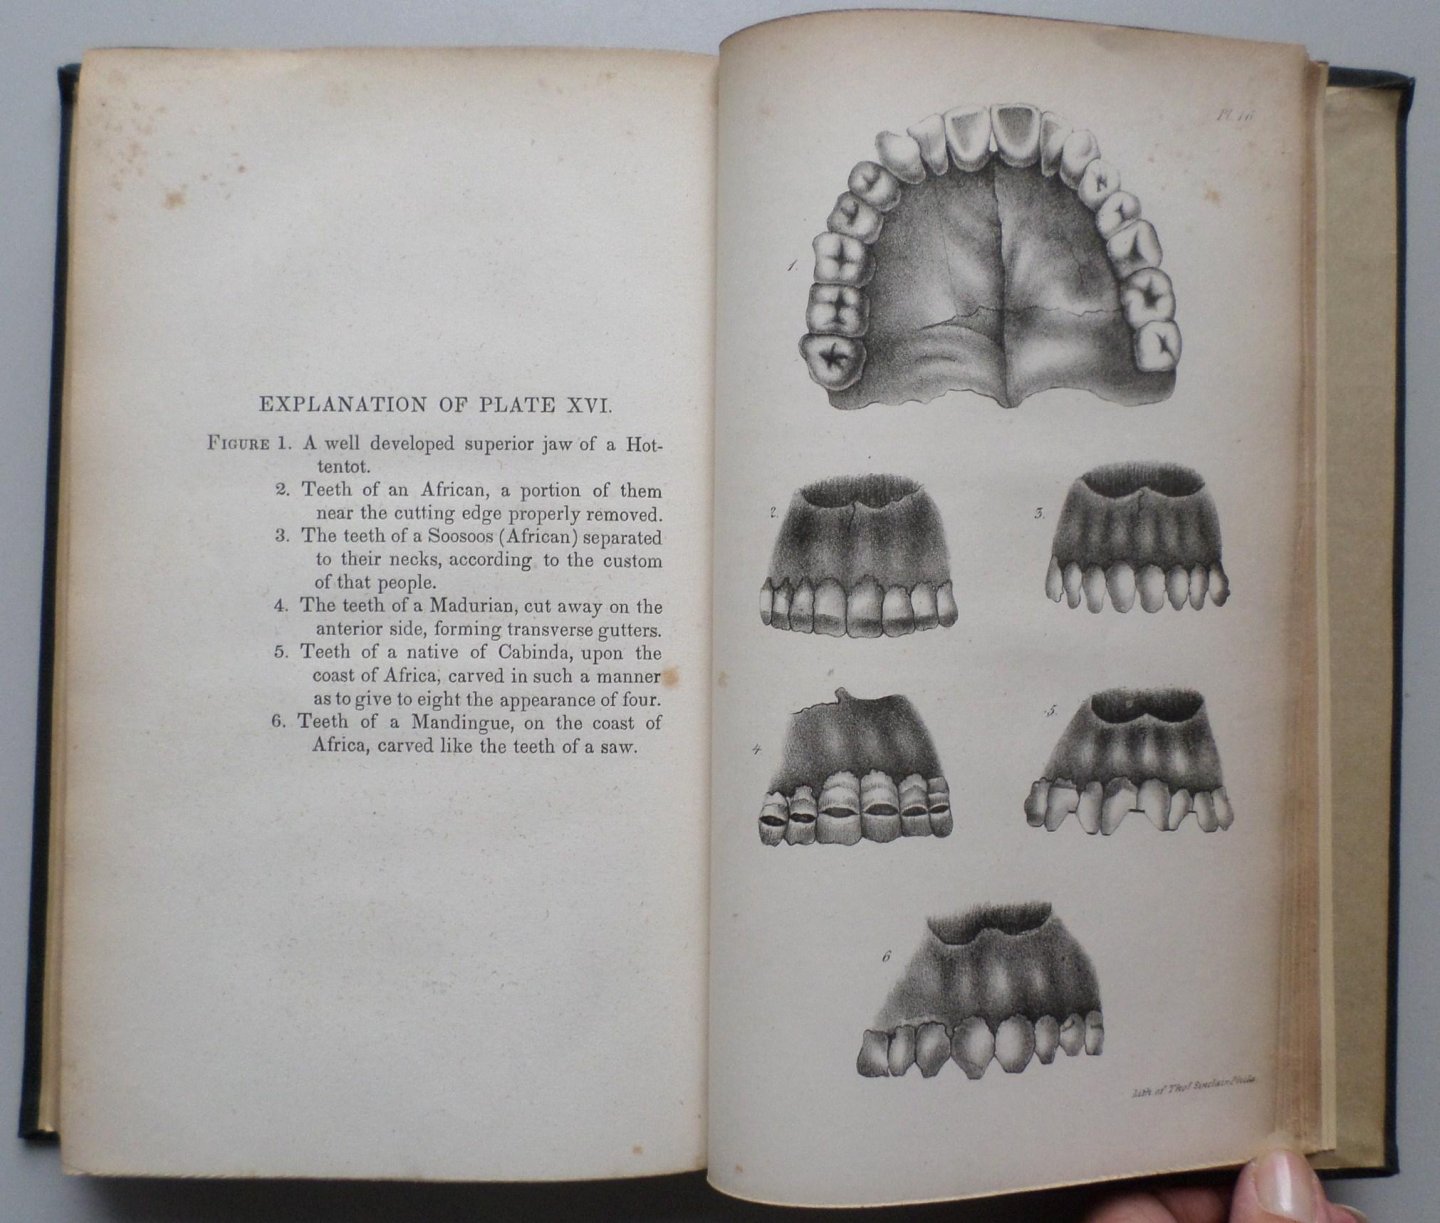 Maury, F. - Treatise on the Dental Art, founded on actual experience. Translated from the French with notes and additions, by J.B.Savier